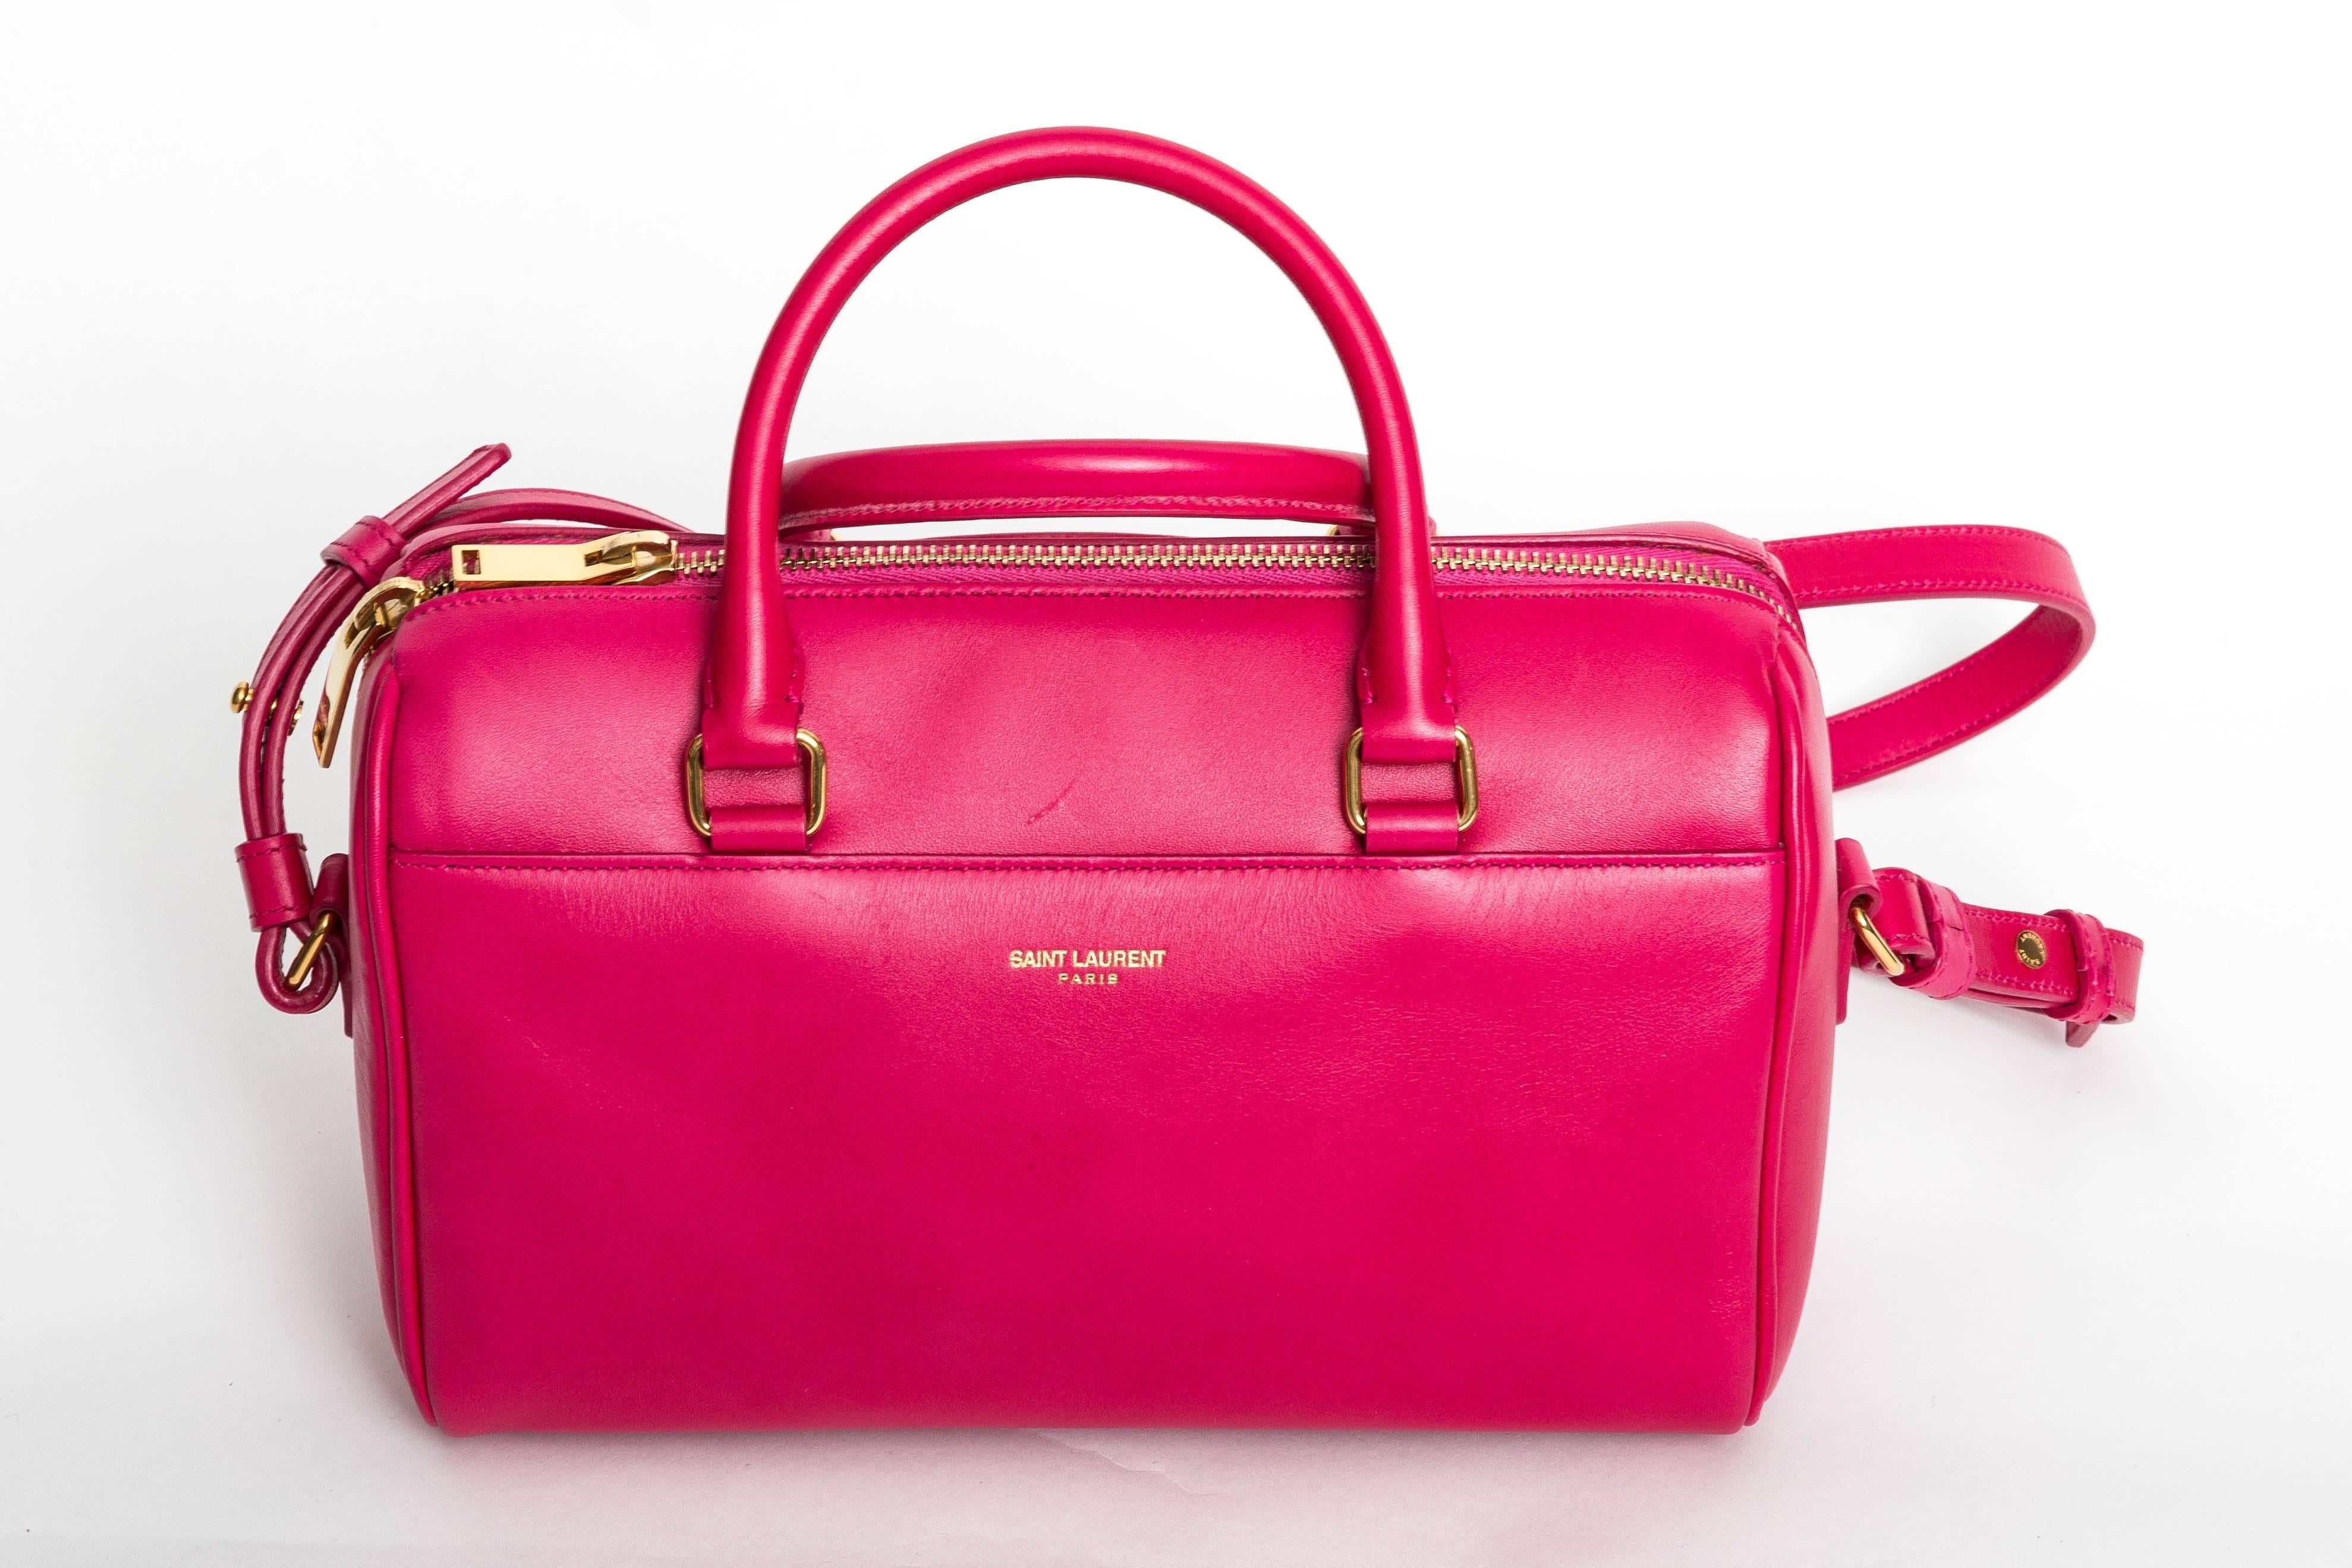 Beautiful Saint Laurent Pink Duffle Bag with Top Handle and Shoulder Strap
One scratch to exterior.
Dust bag is included.